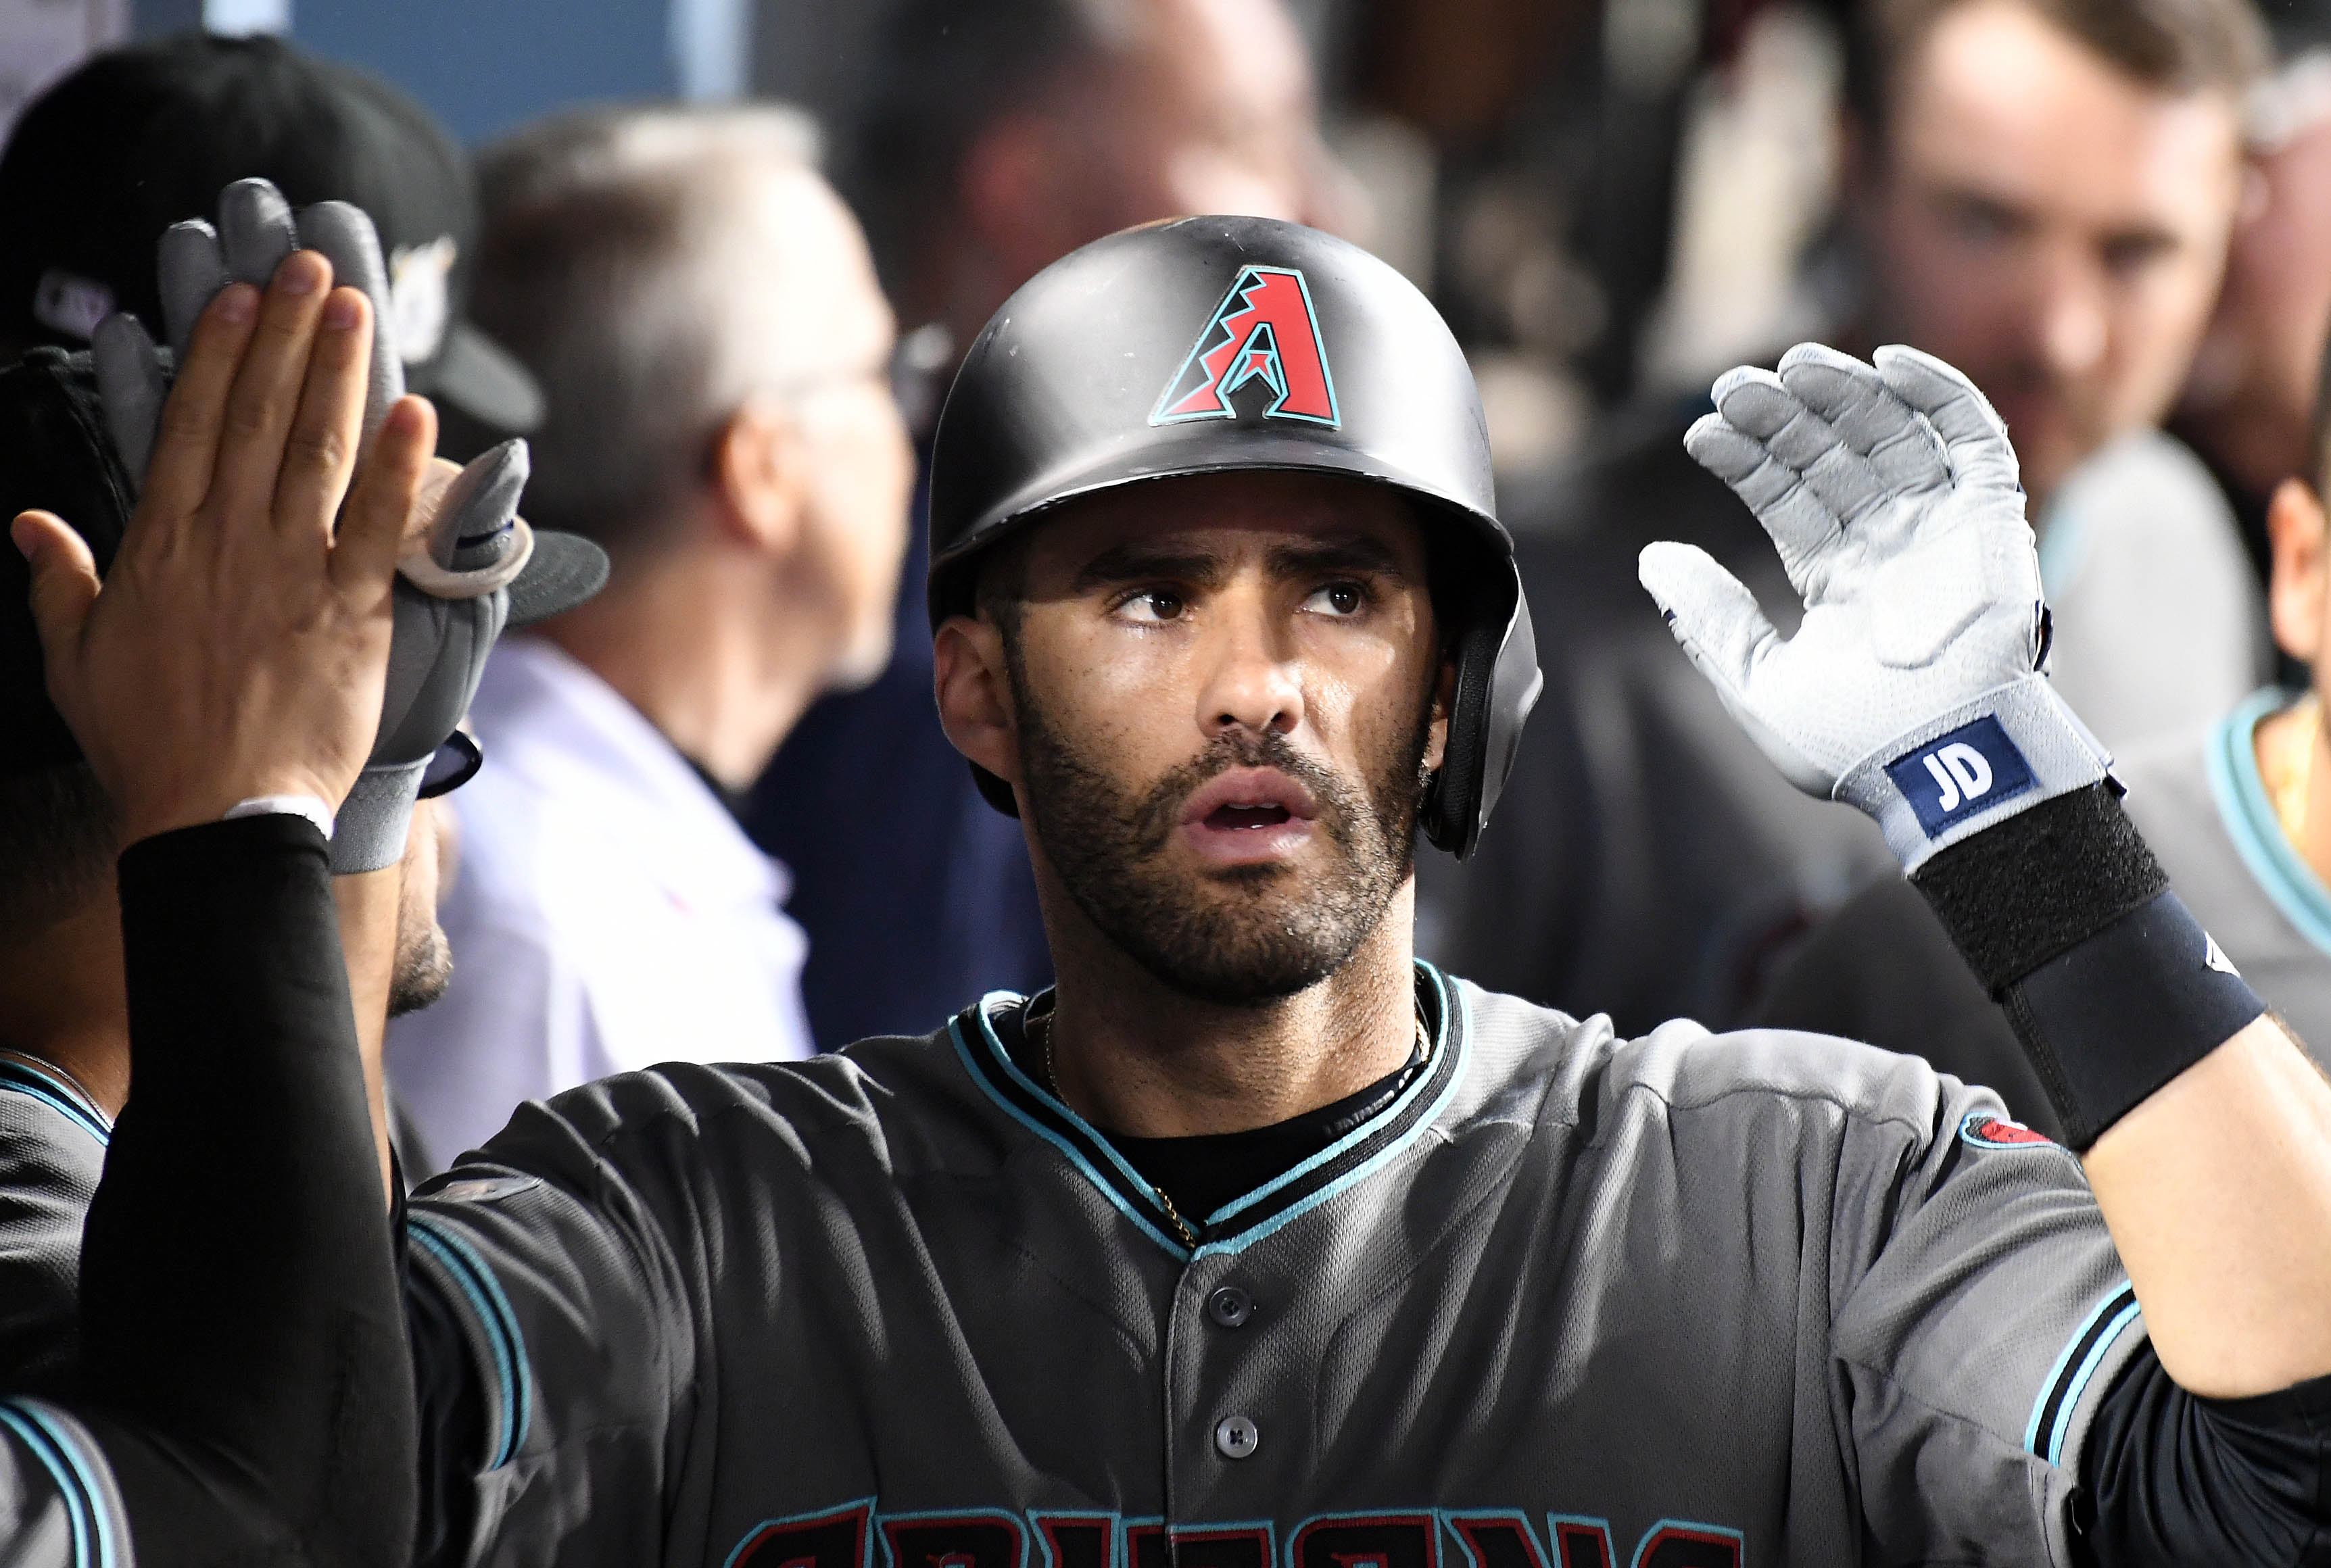 Buffa: The J.D. Martinez temptation is strong for the Cardinals